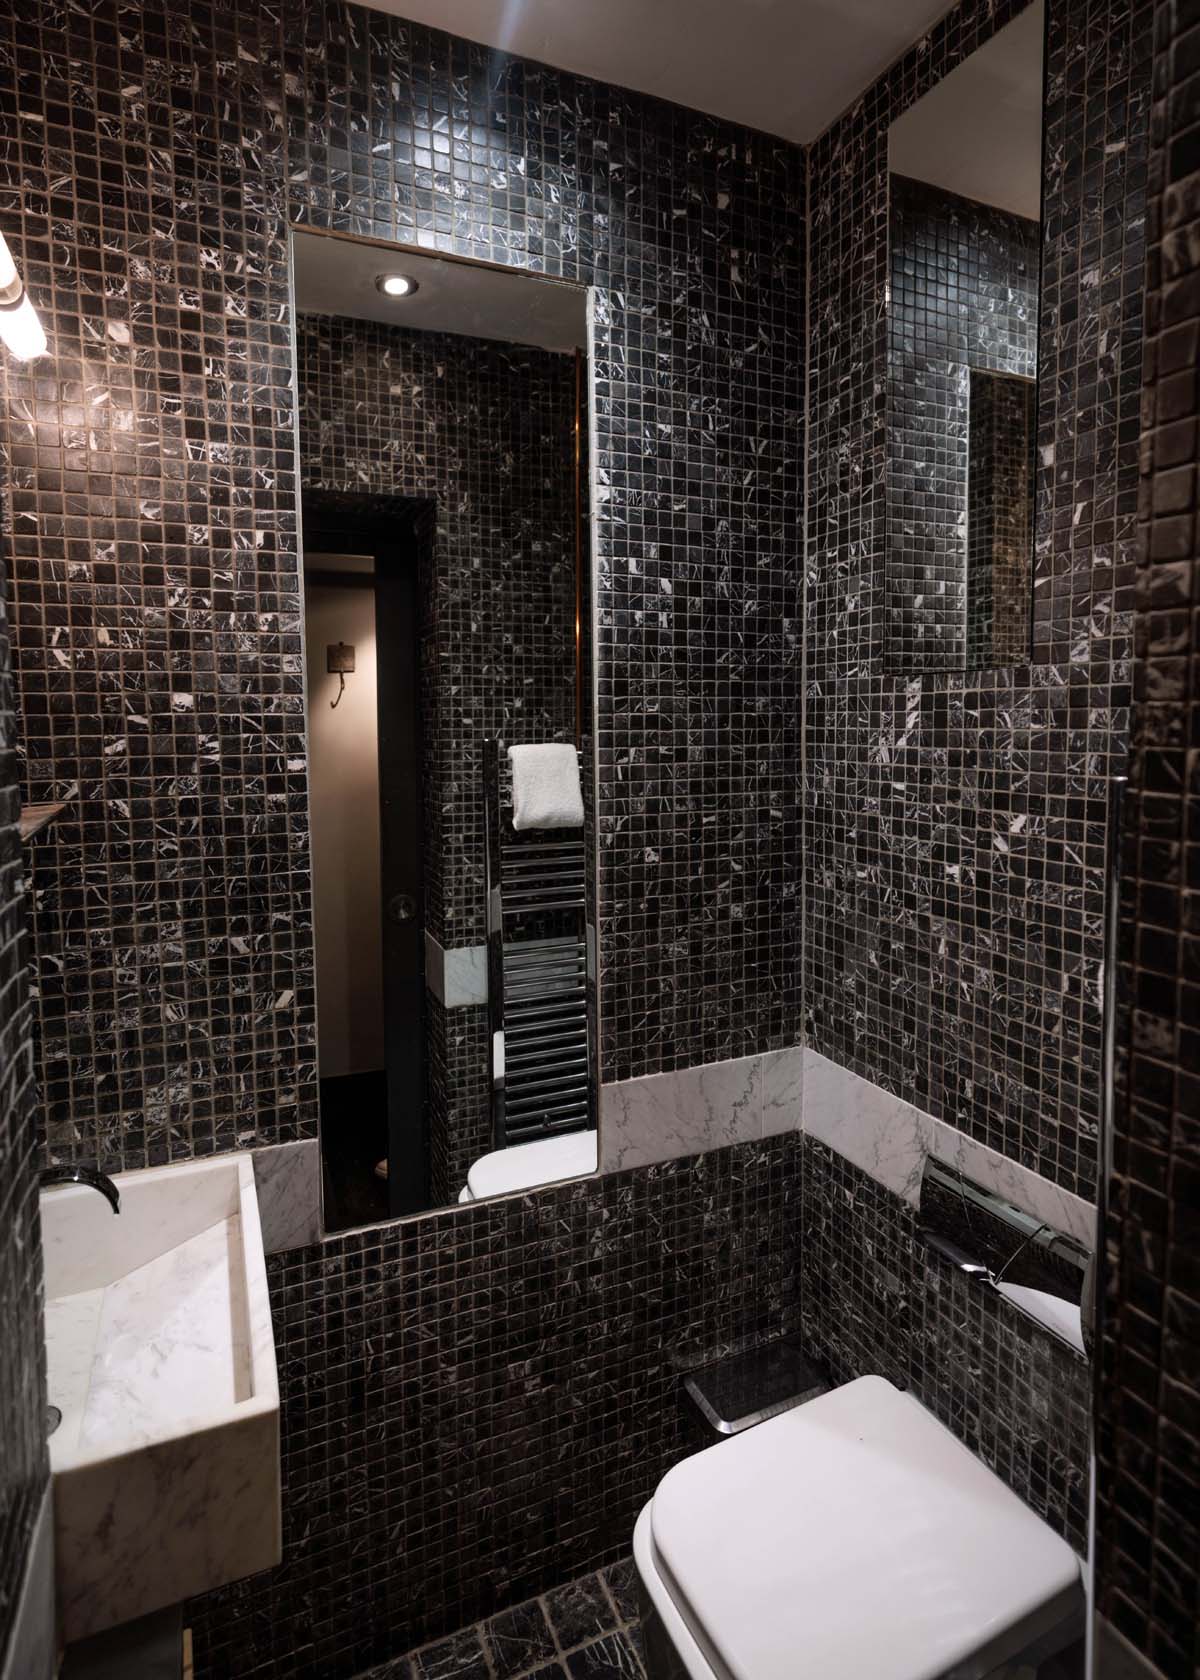 A loo with black mosaic tiles